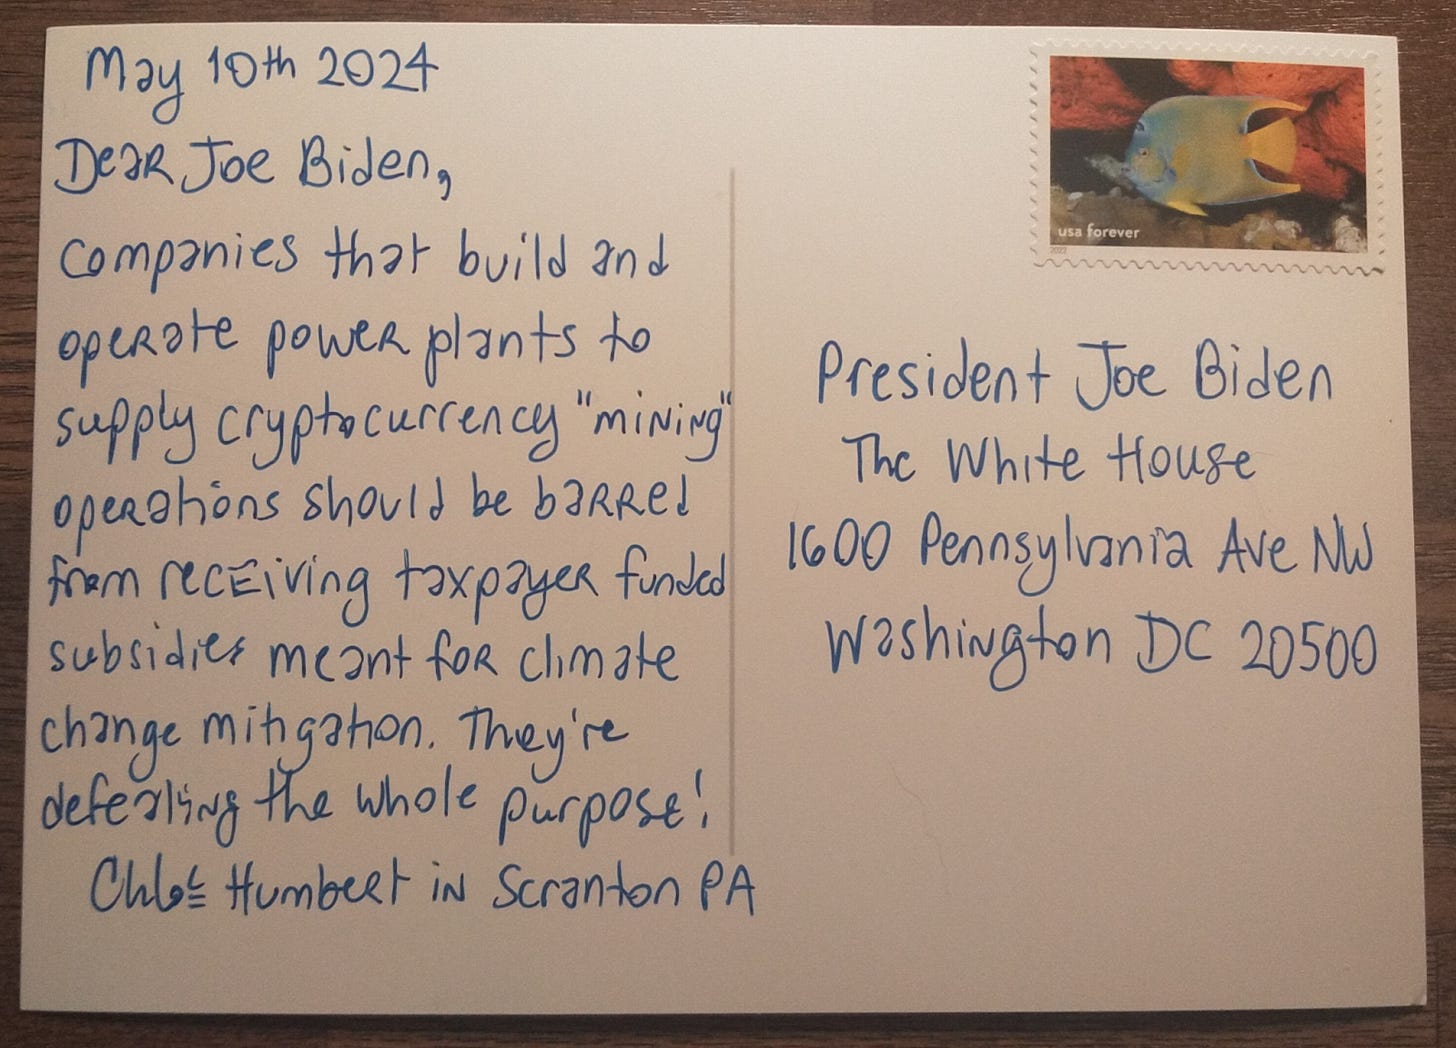 Image is a postcard the text reads: May 10th 2024. Companies that build and operate power plants to supply cryptocurrency “mining” operations should be barred from receiving taxpayer subsidies meant for climate change mitigation. They’re defeating the whole purpose. Chloe Humbert in Scranton PA. Addressed to President Joe Biden at the White House, on a postcard with National Marine Sanctuary stamp with the picture of a tropical fish. 